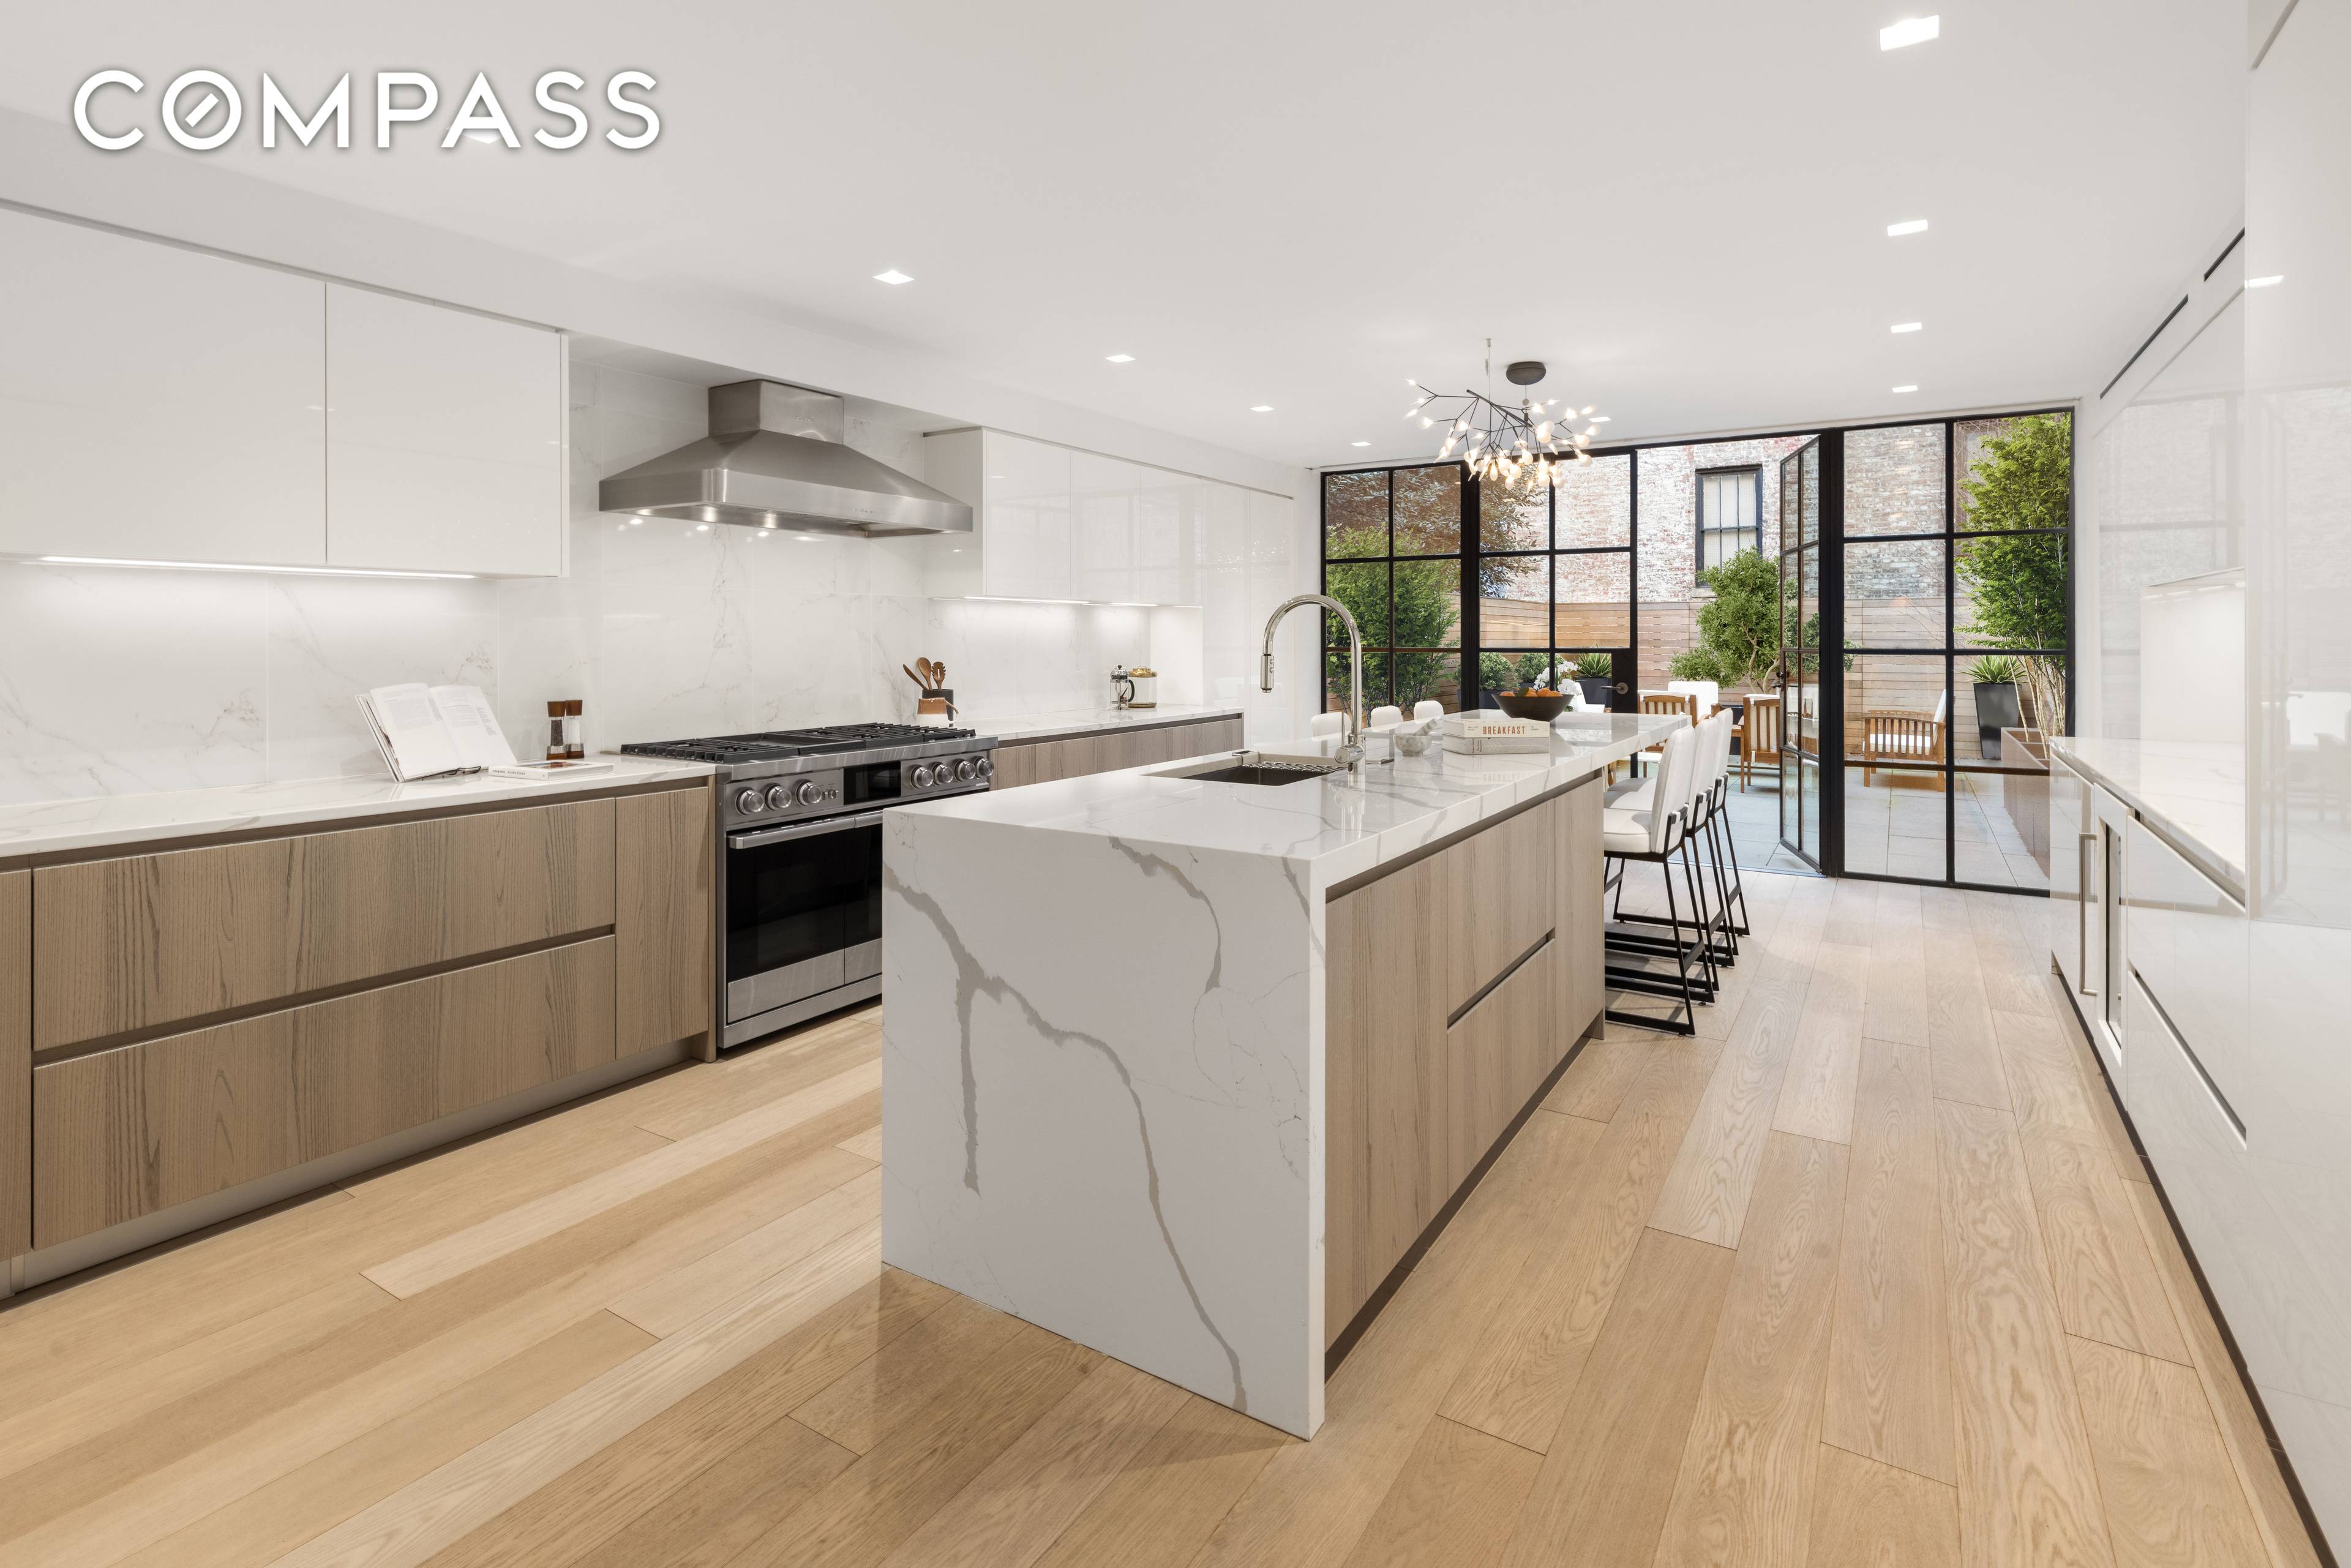 54 East 80th Street presents an extraordinary opportunity to own a meticulously renovated five story 18' wide limestone townhouse.